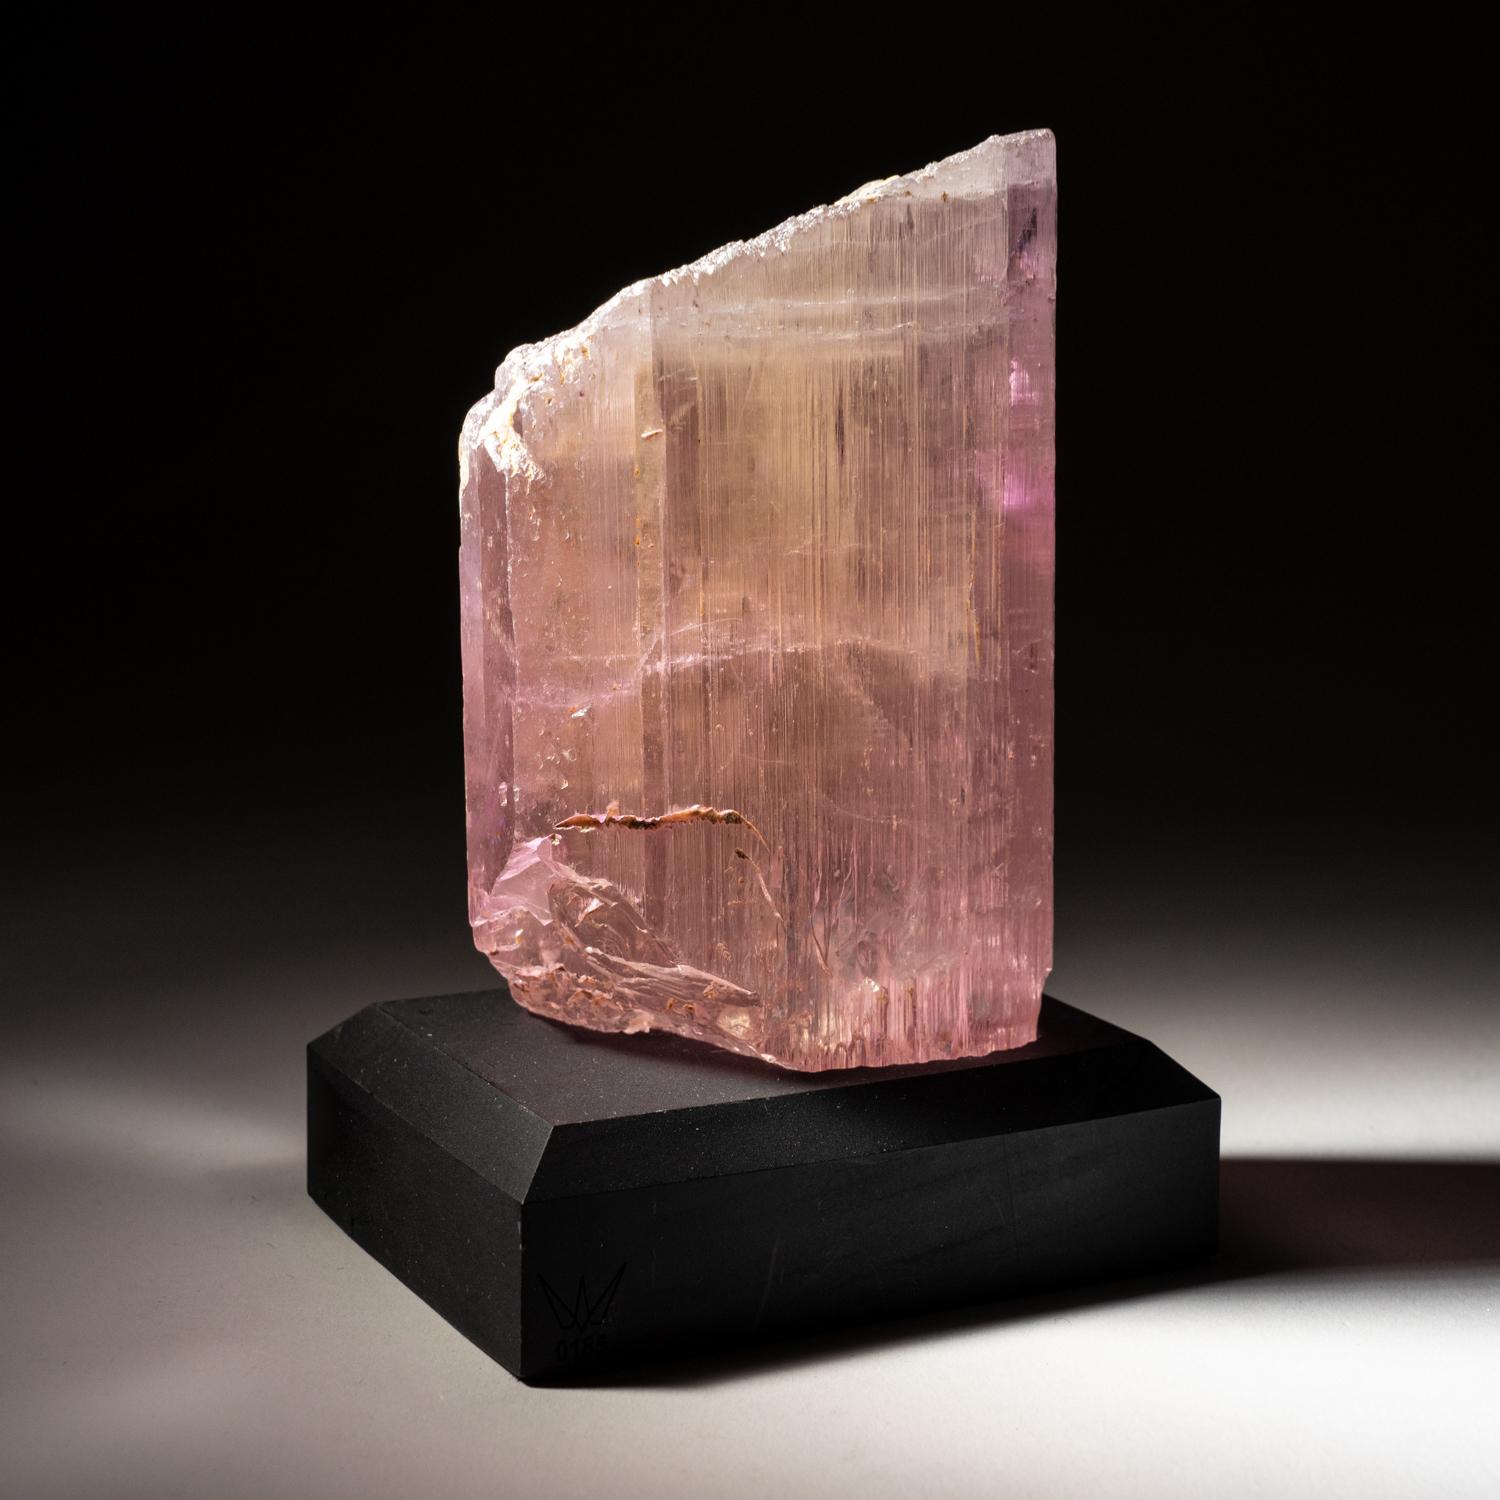 Fully terminated transparent gem quality spodumene var. kunzite with intense vibrant pink color all throughout the crystals. The crystal faces are deeply striated with a glassy luster. Vibrant pink color at its c-axis. Damage free. Custom base